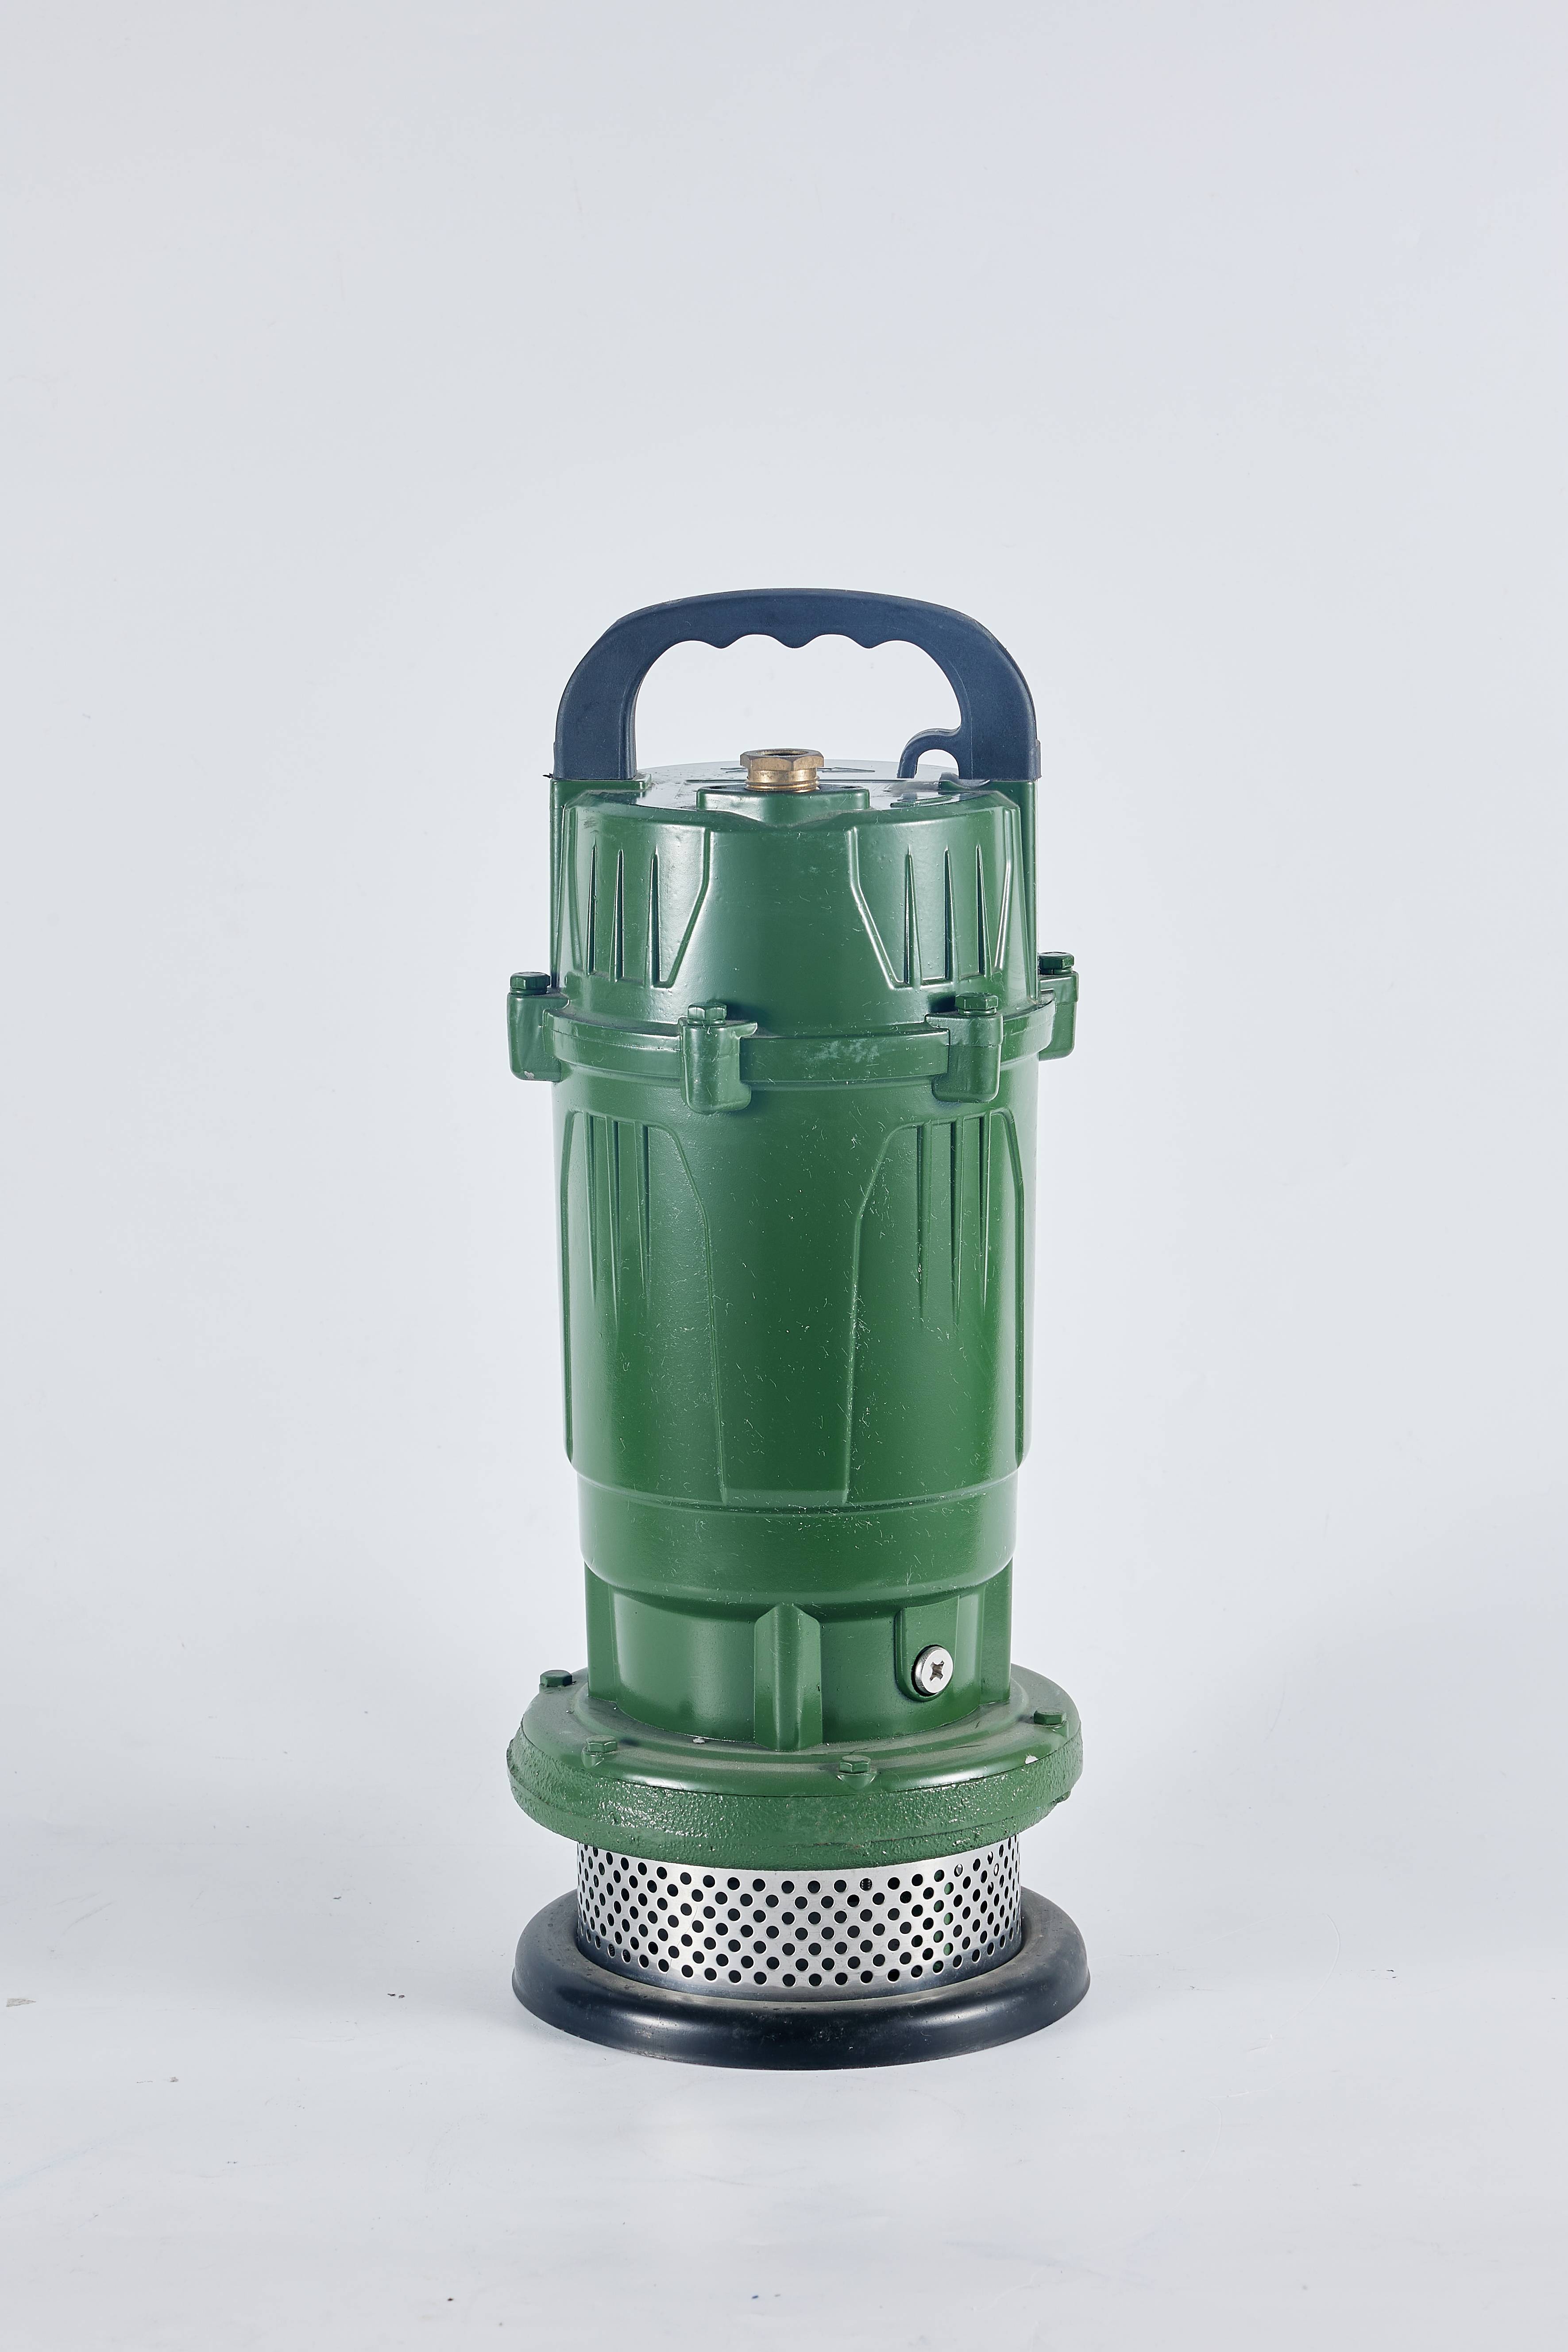 Guanbang high quality portable rainage pump submersible waste water household electric pump for irrigation